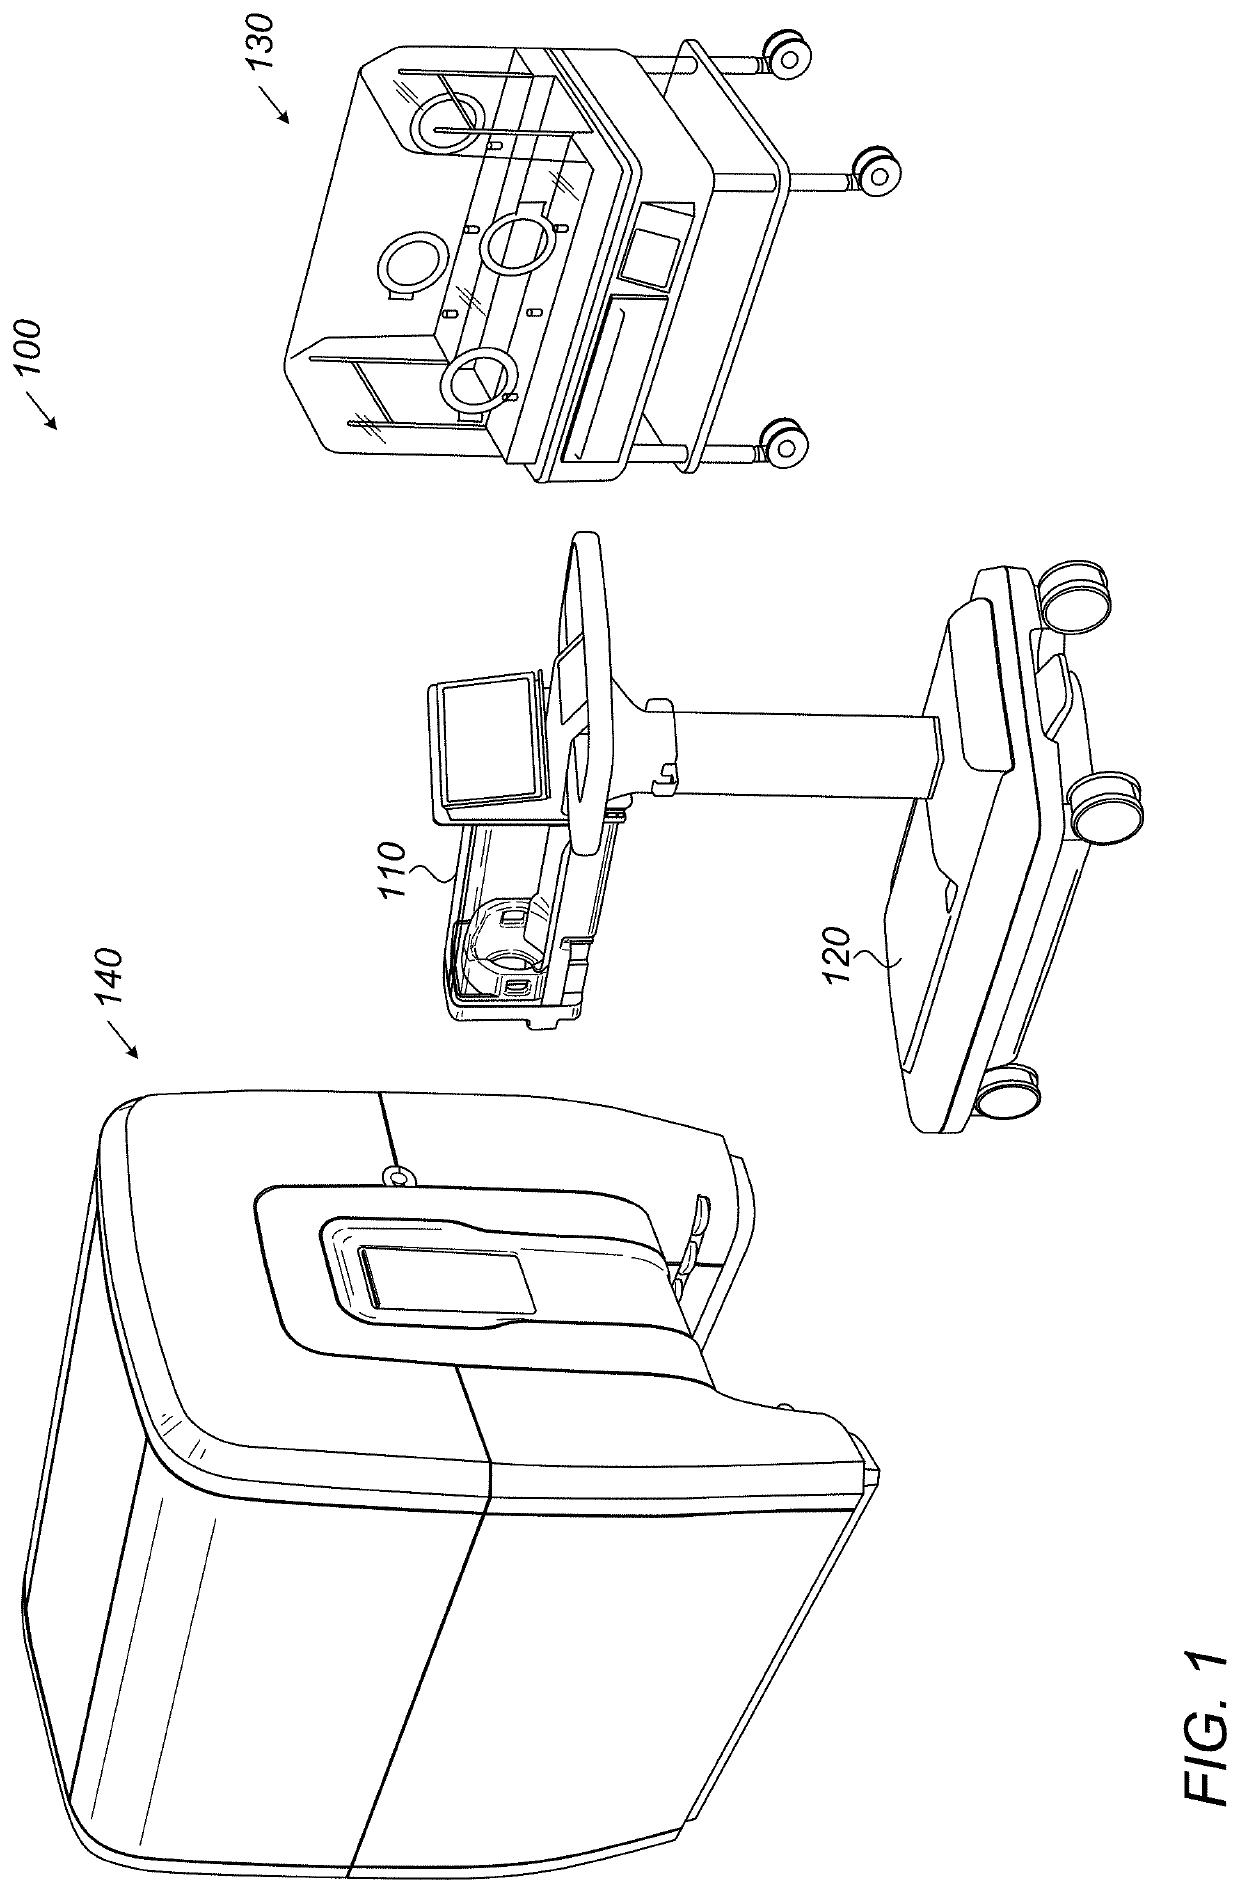 Devices and methods for a neonate incubator, capsule and cart